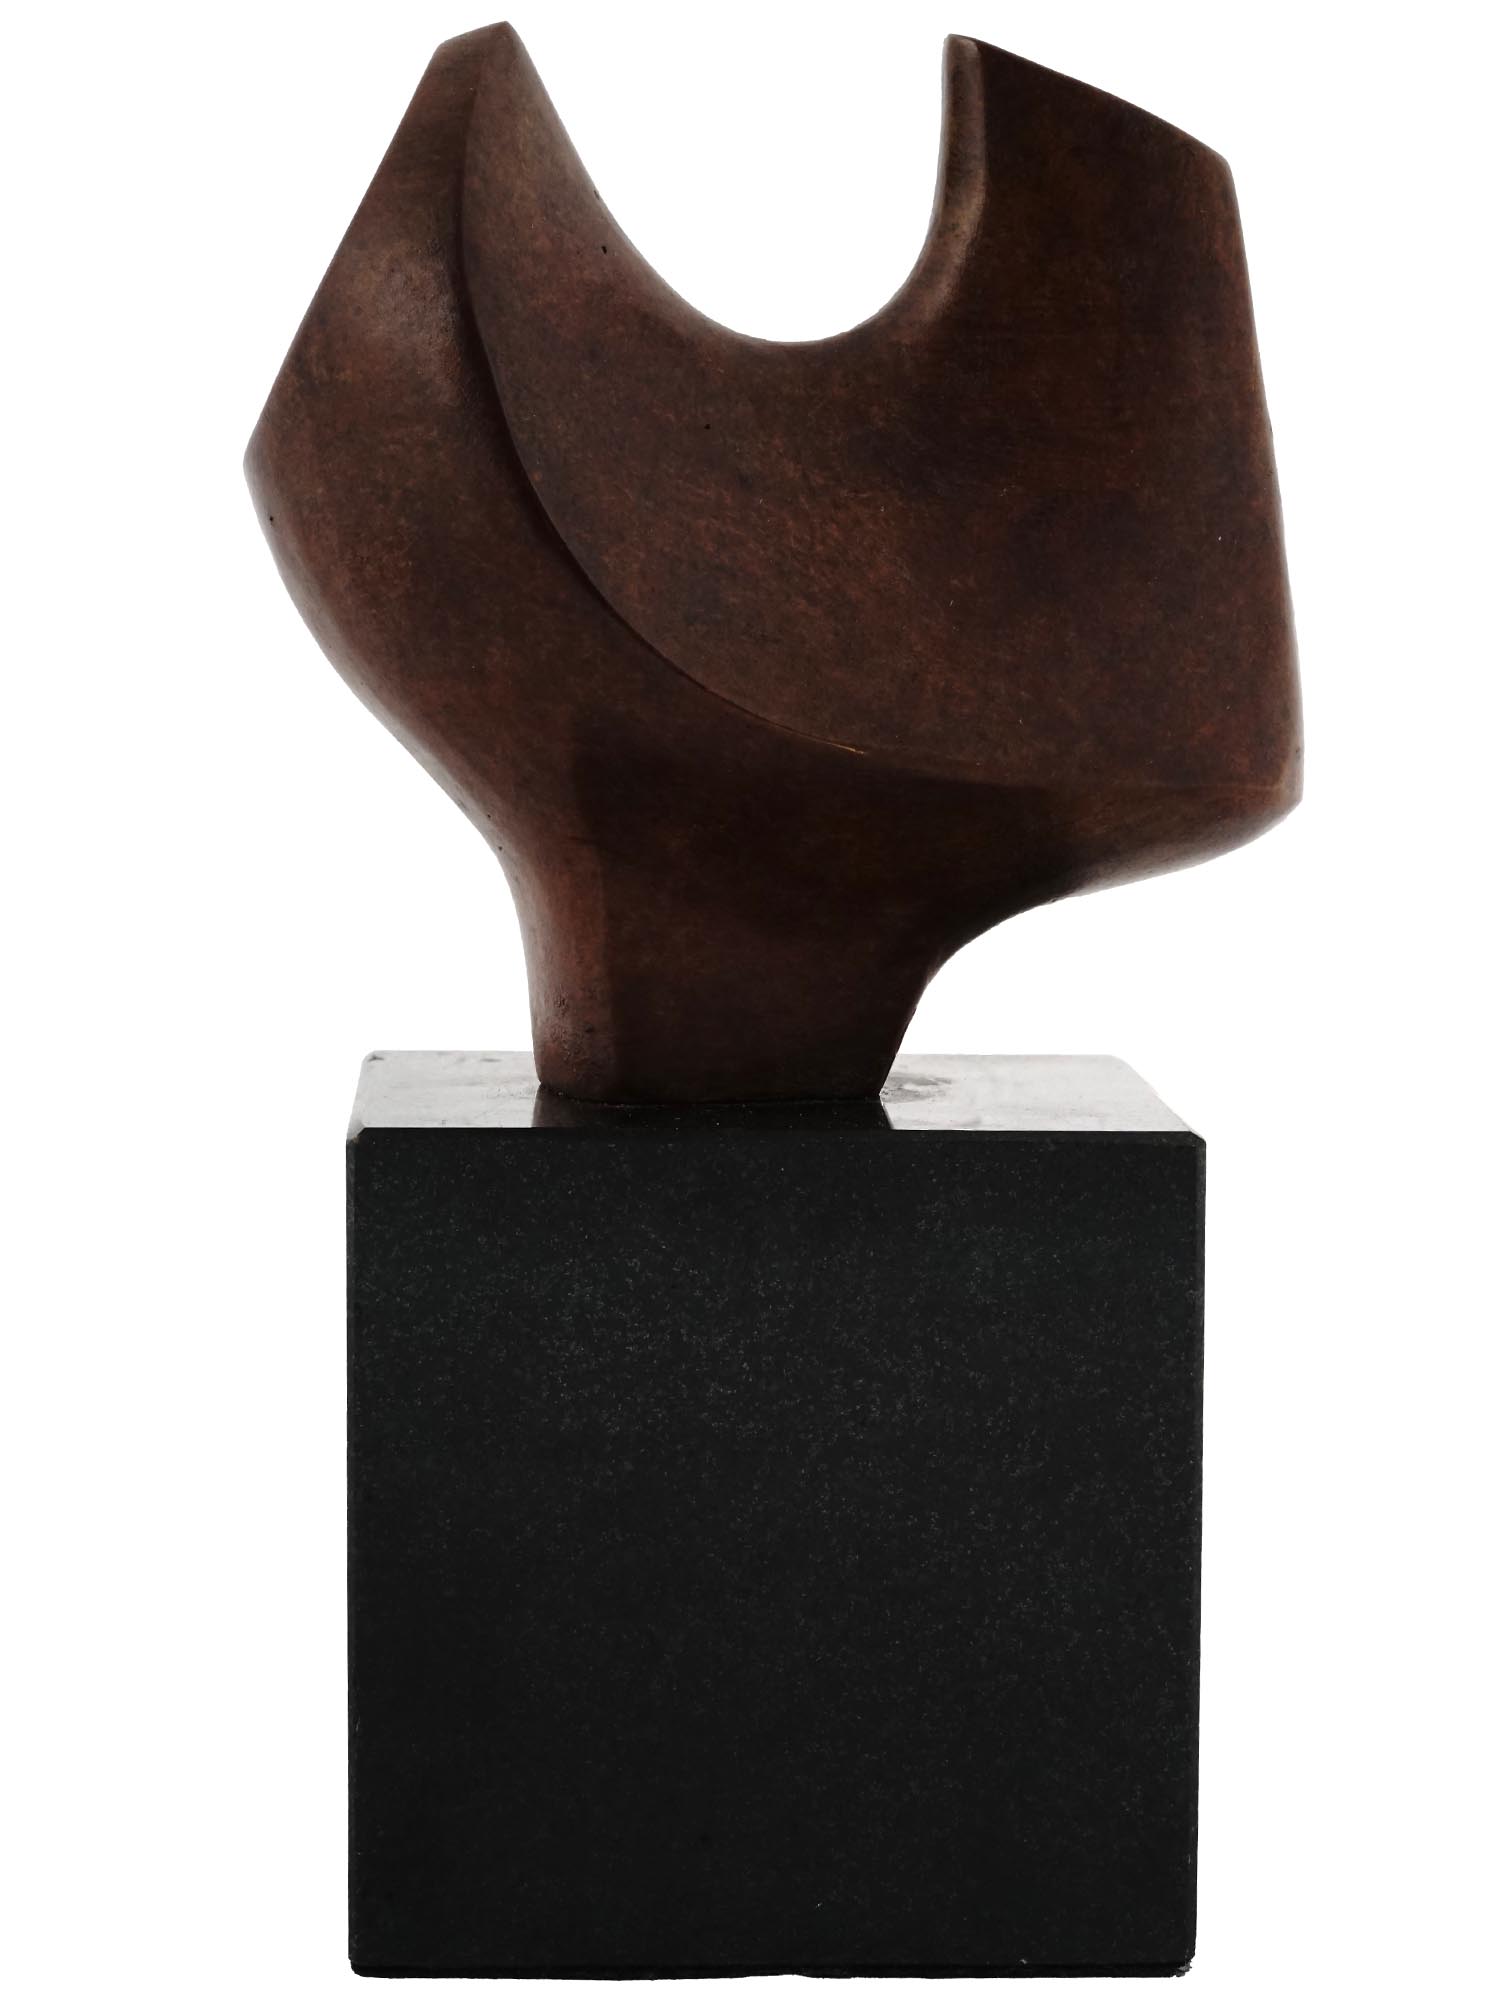 USA ABSTRACT BRONZE SCULPTURE BY GILBERT FRANKLIN PIC-1